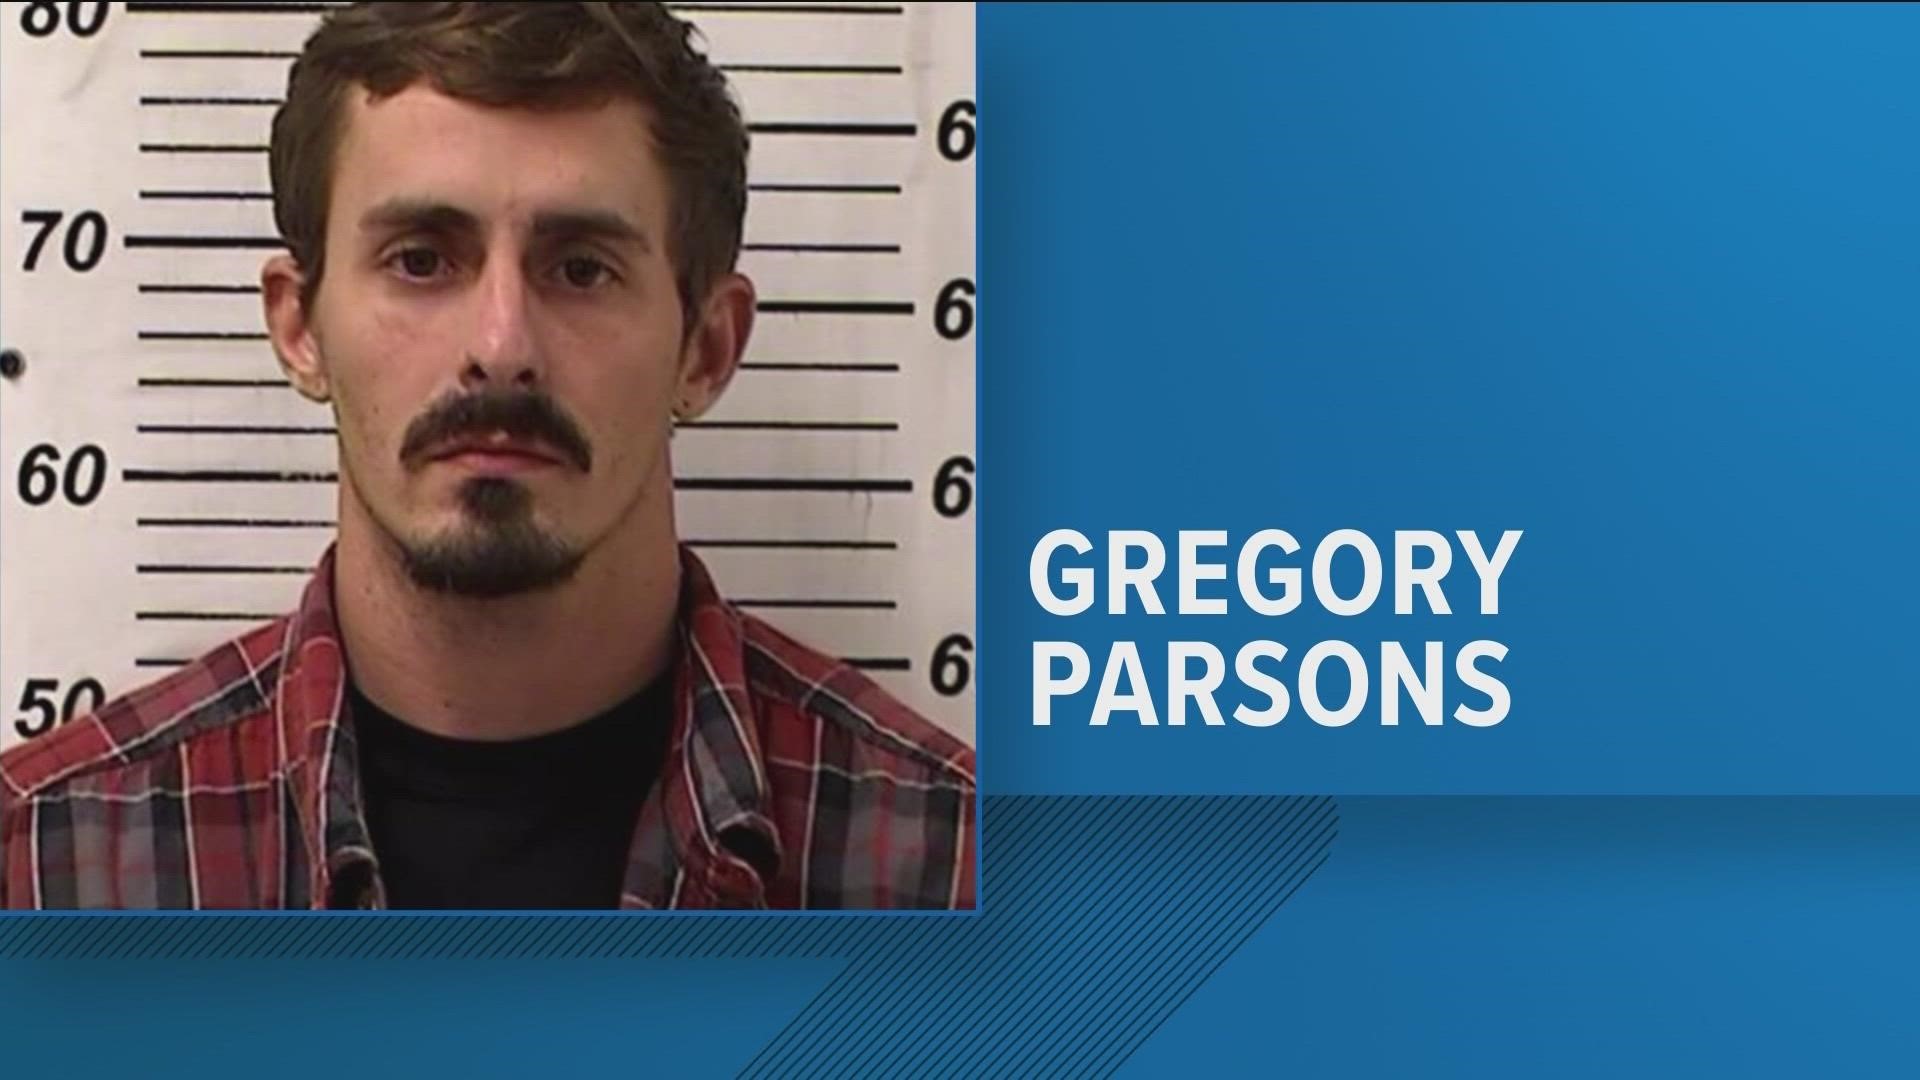 Defiance Police arrested Gregory Parsons, who has been named a person of interest, on an unrelated domestic violence charge in the Columbus area.